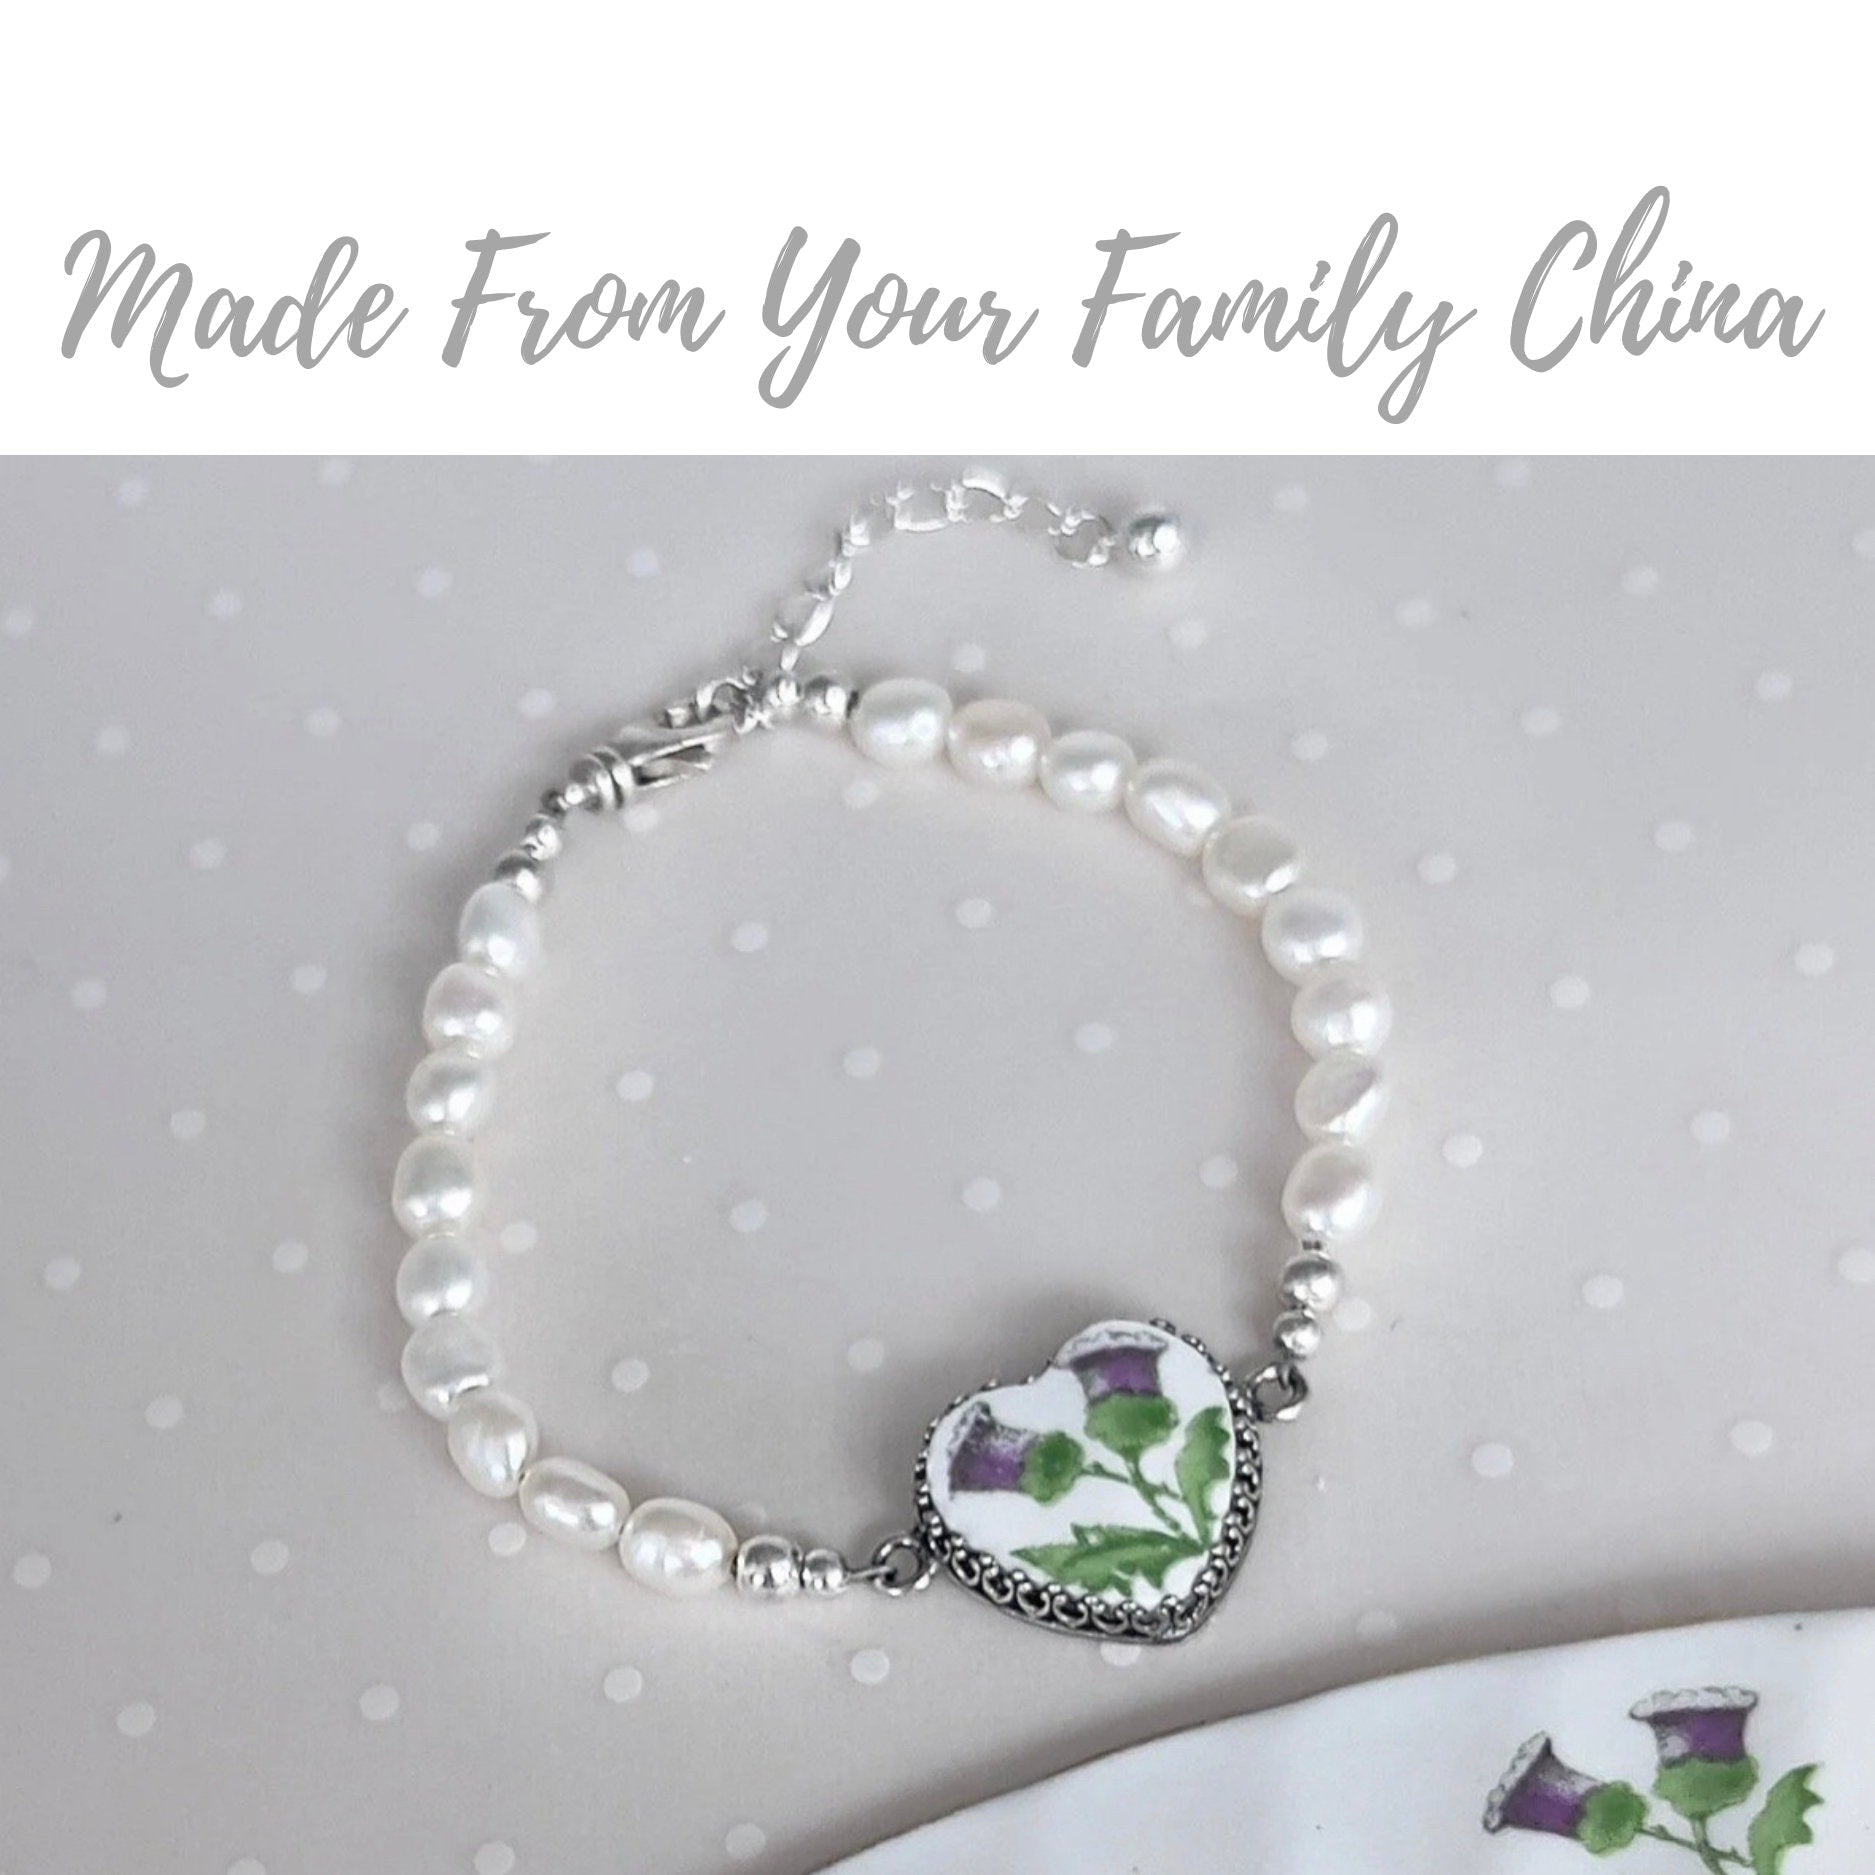 CUSTOM ORDER Freshwater Pearl Heart Charm Bracelet, Custom Memorial Broken China Jewelry, Family Jewelry, Made From Your China, Unique Gifts